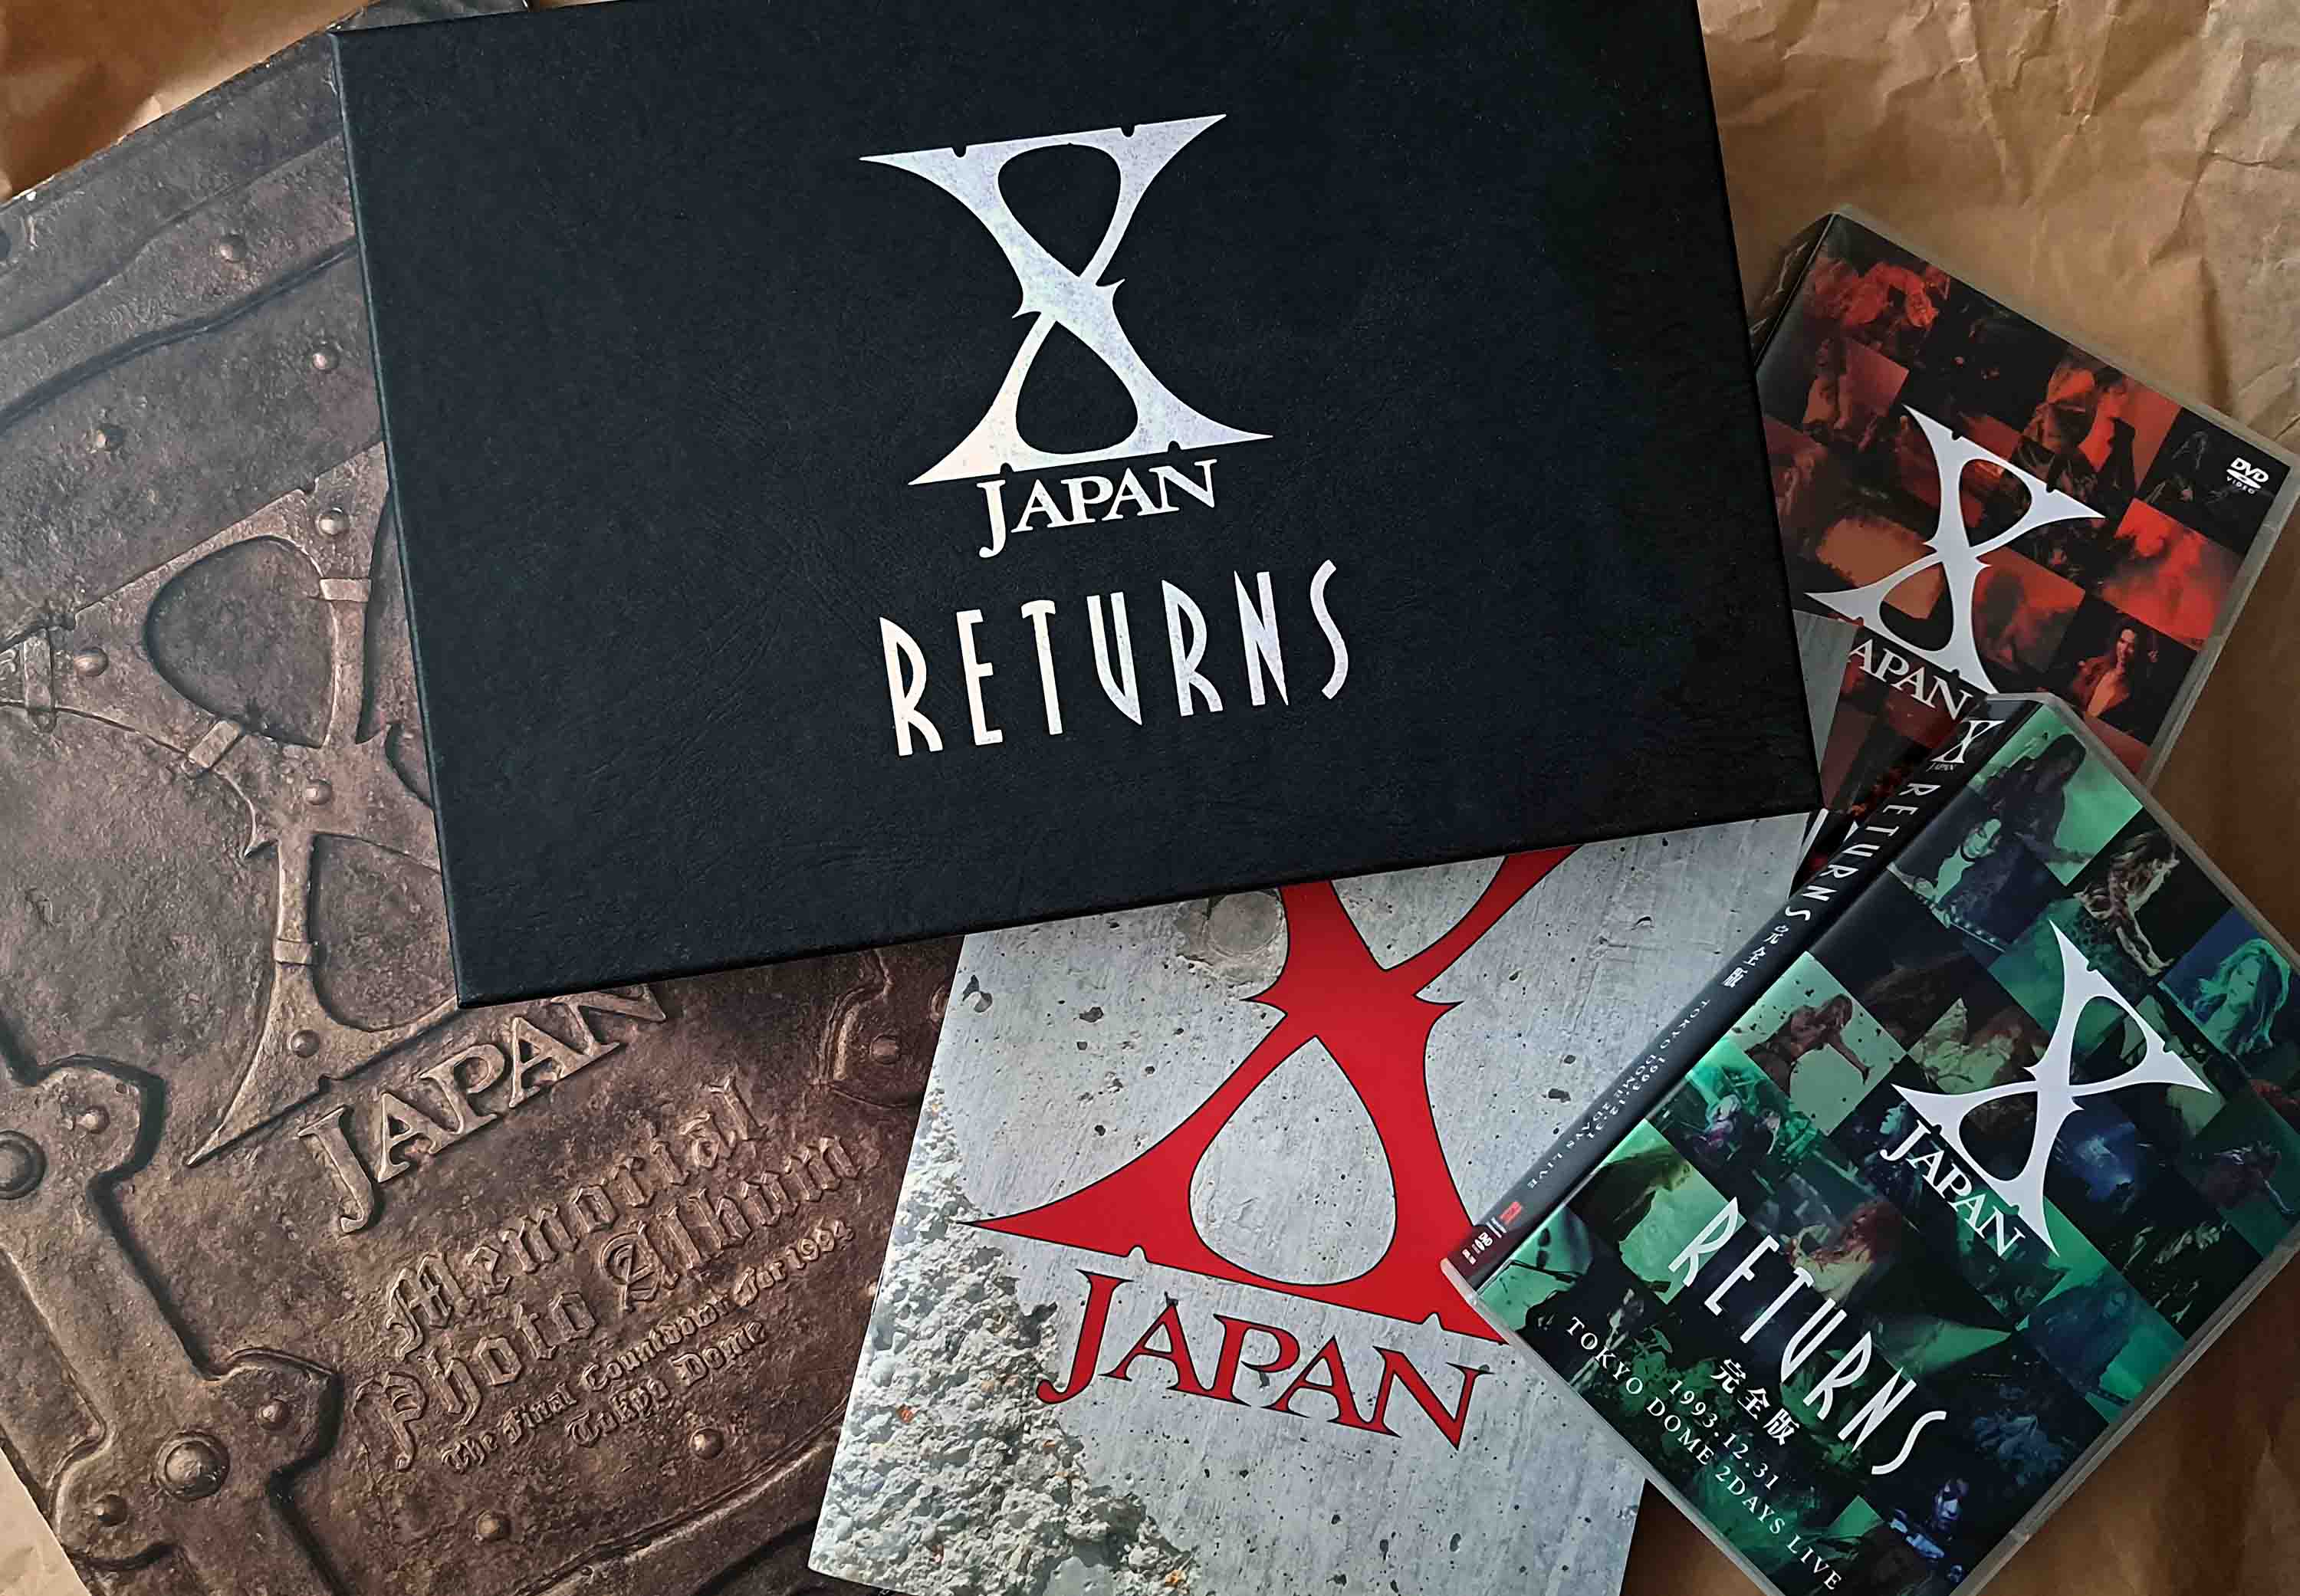 X Japan Returns, Tokyo Dome, 30 and 31 December 1993 – Tales 